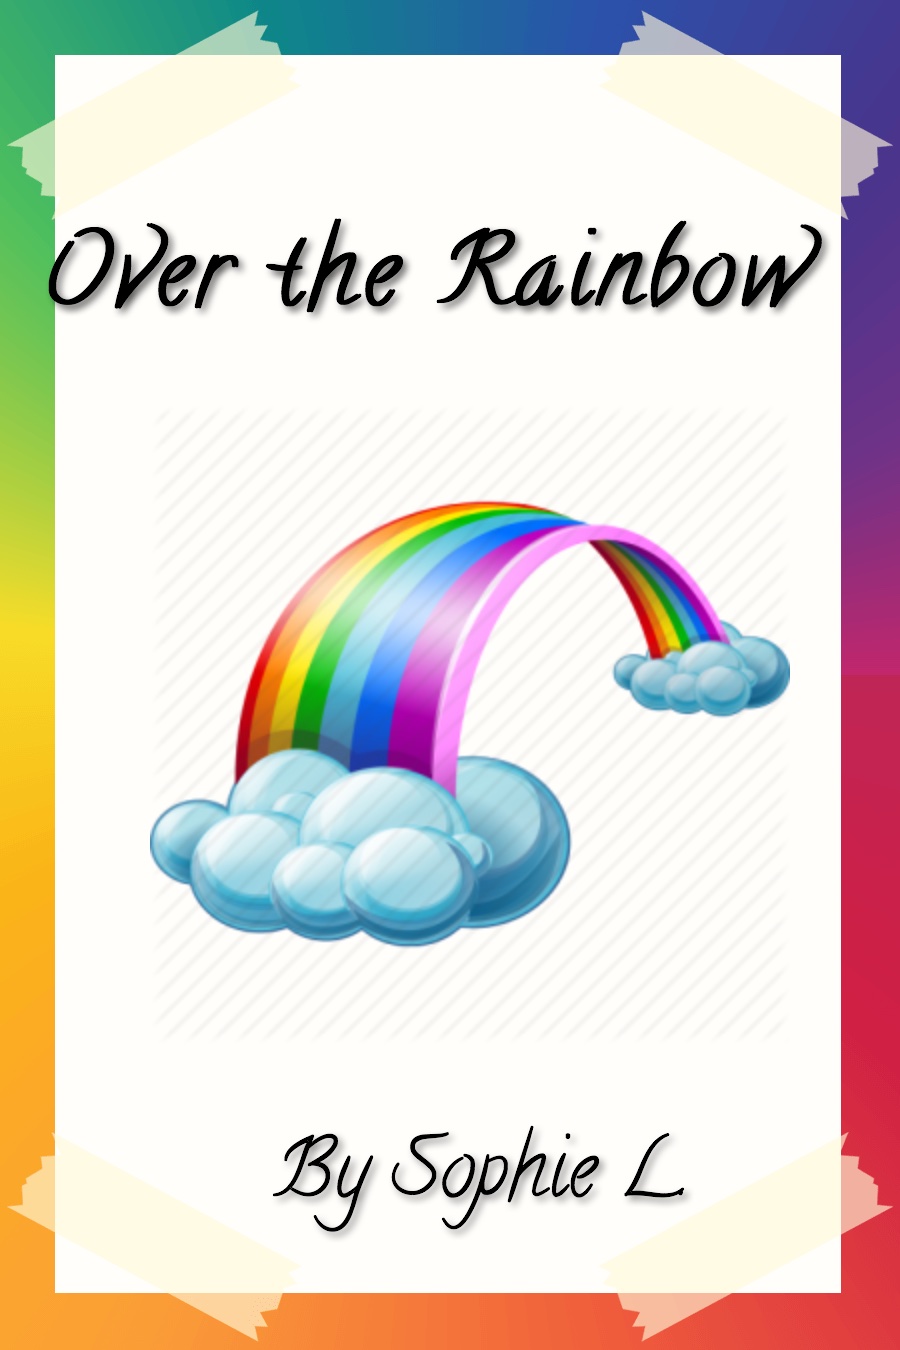 Over the Rainbow by Sophie L